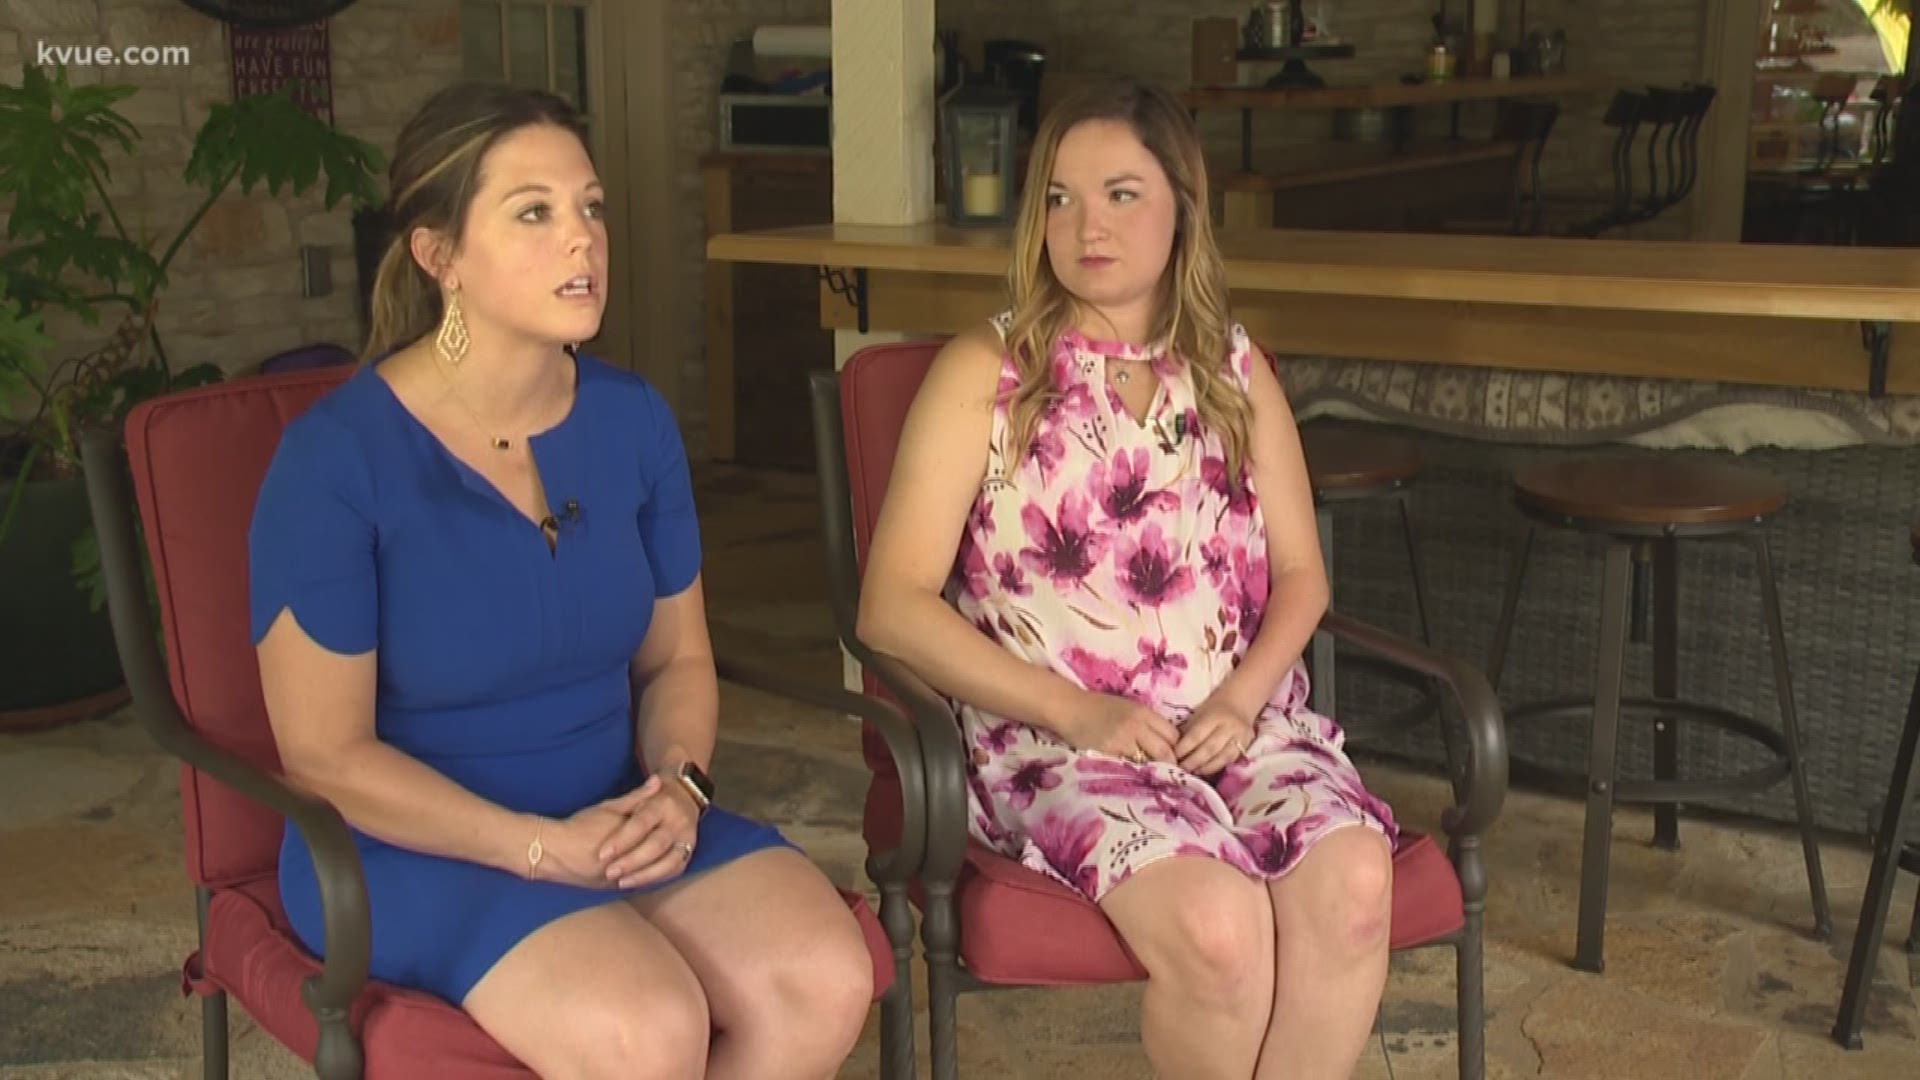 Two former Texas A&M students are trying to change what they call the culture of rape at their alma mater.